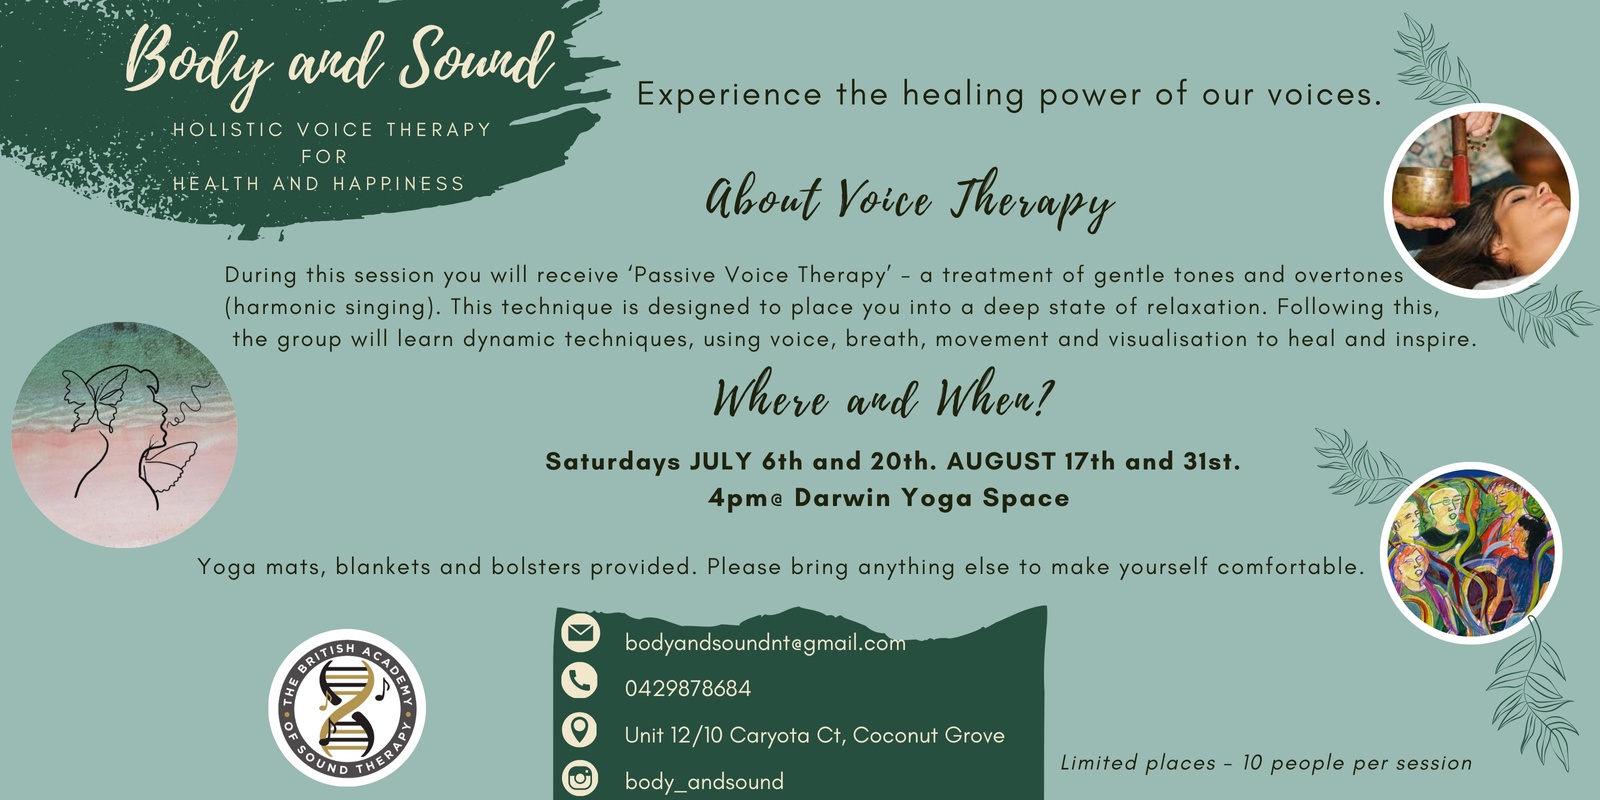 Banner image for Group Voice Therapy